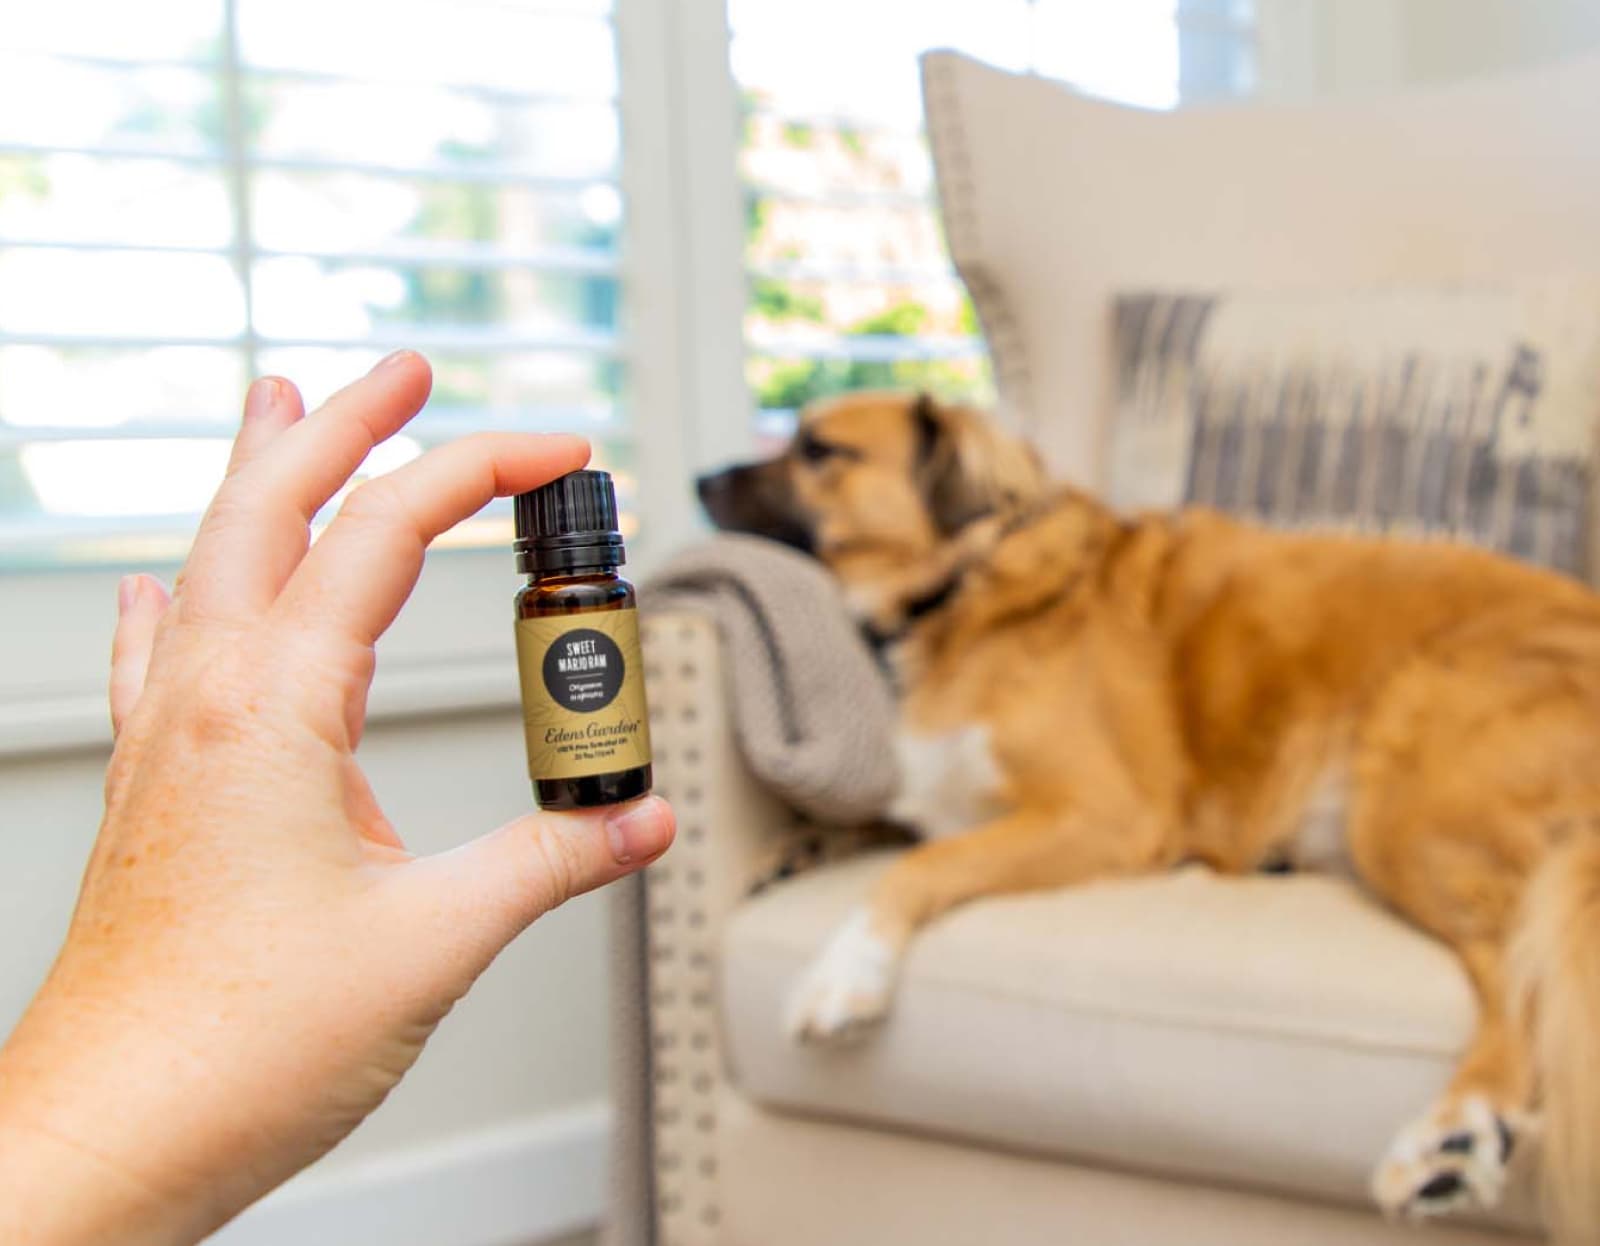 can you use citronella oil on dogs